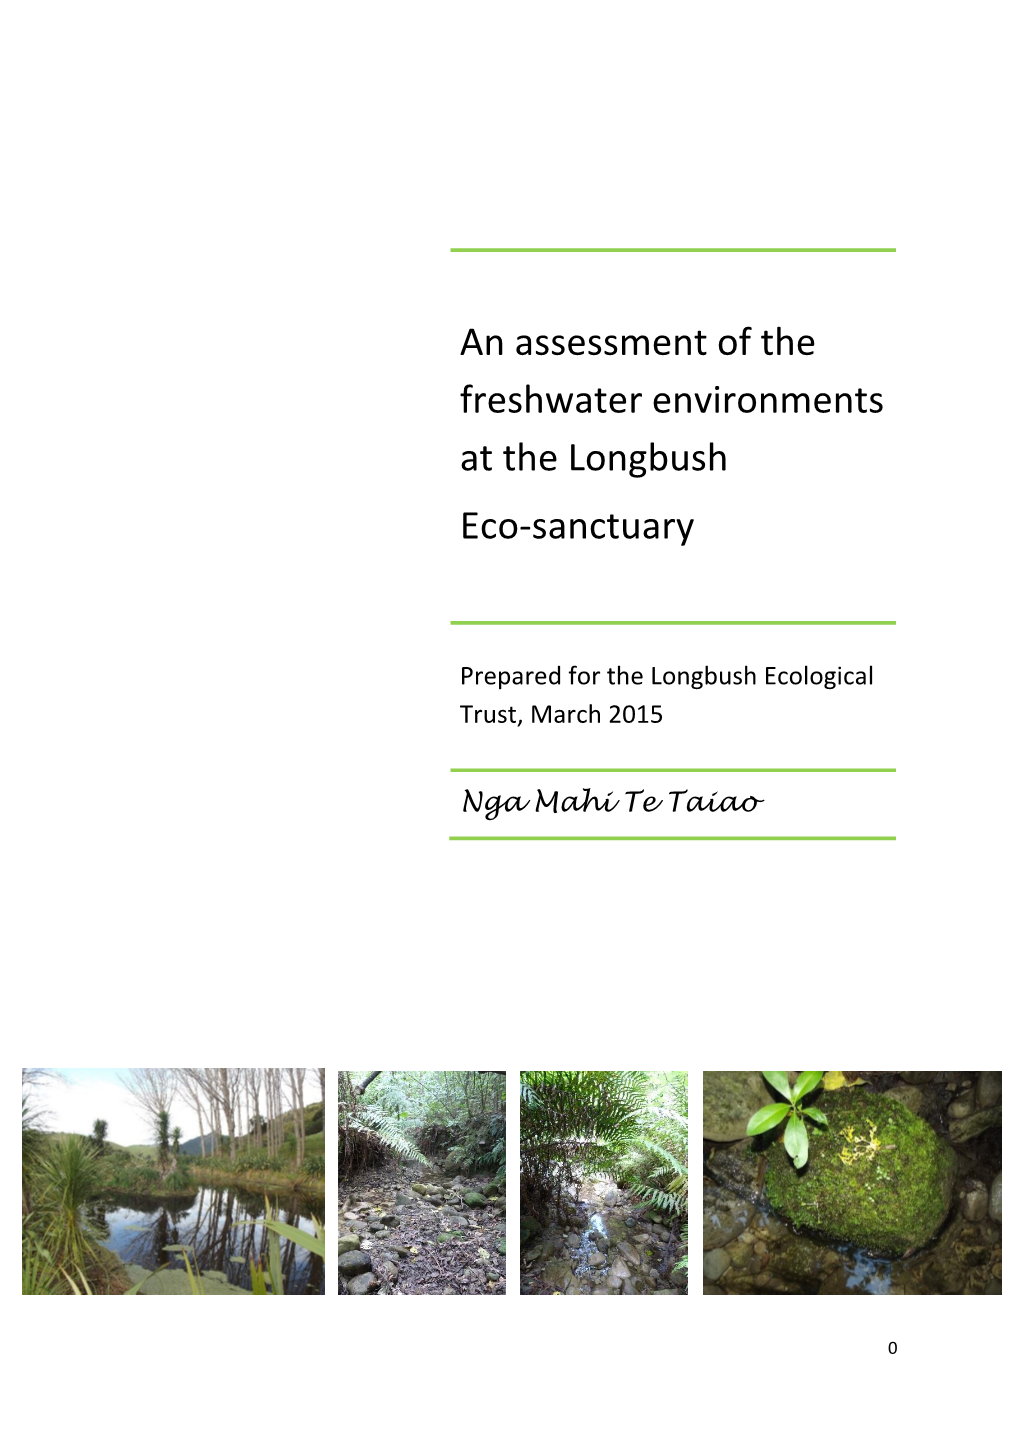 An Assessment of the Freshwater Environments at the Longbush Eco-Sanctuary